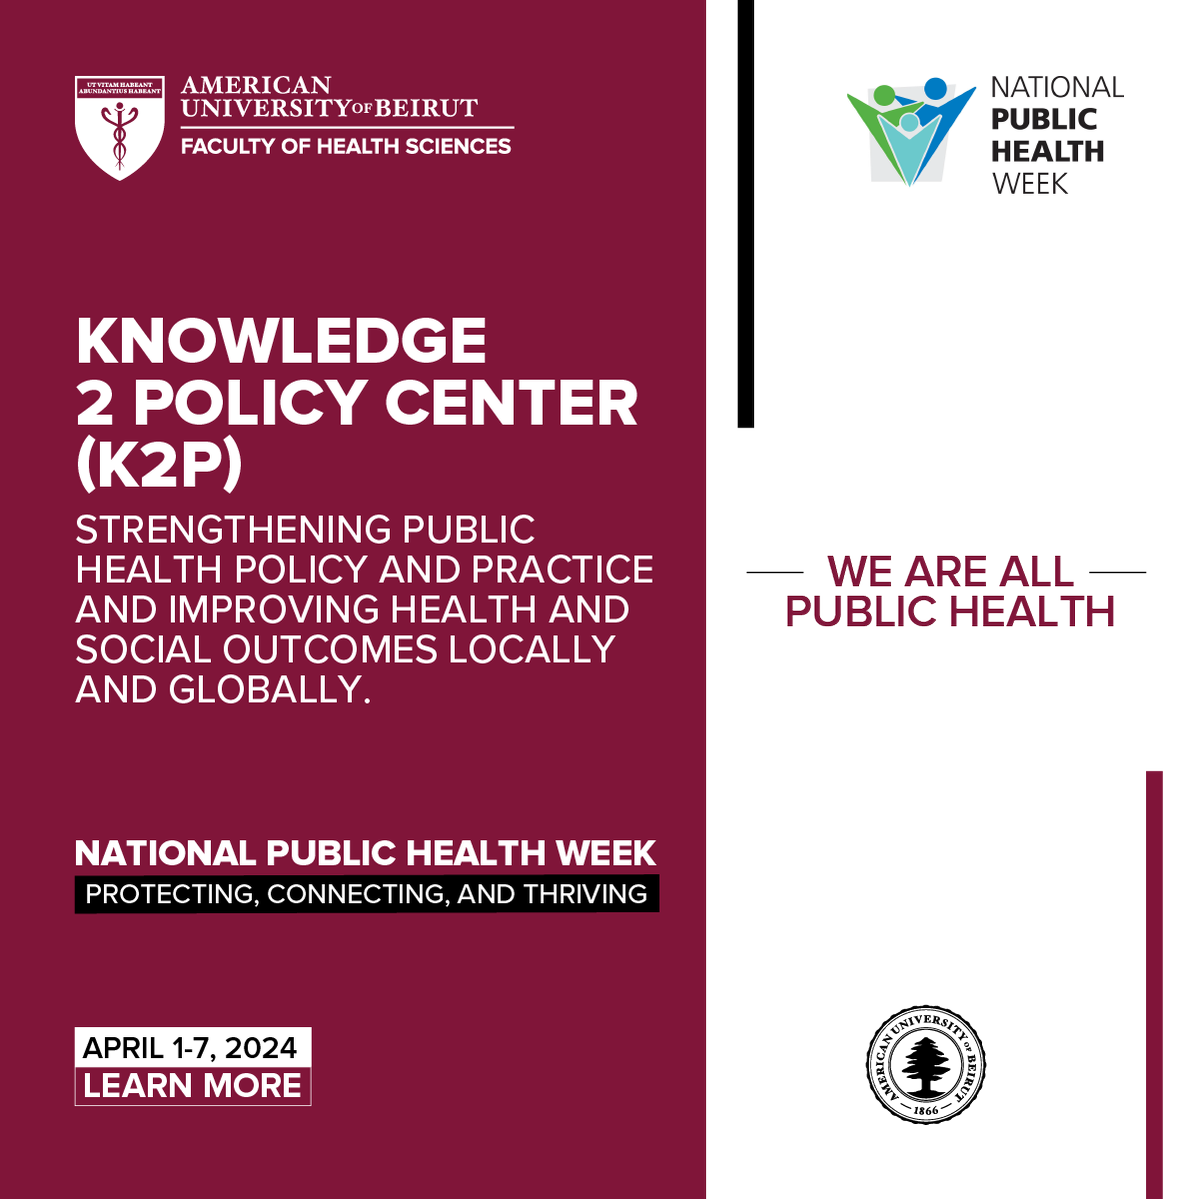 #FHS at #AUB is spotlighting its centers that are at the forefront of the battle for enhanced #PublicHealth in Lebanon & beyond.

#K2P is a knowledge management platform that bridges the gap between science, policy, and politics.

👉bit.ly/3POdi2g

#NPHW #NPHW2024